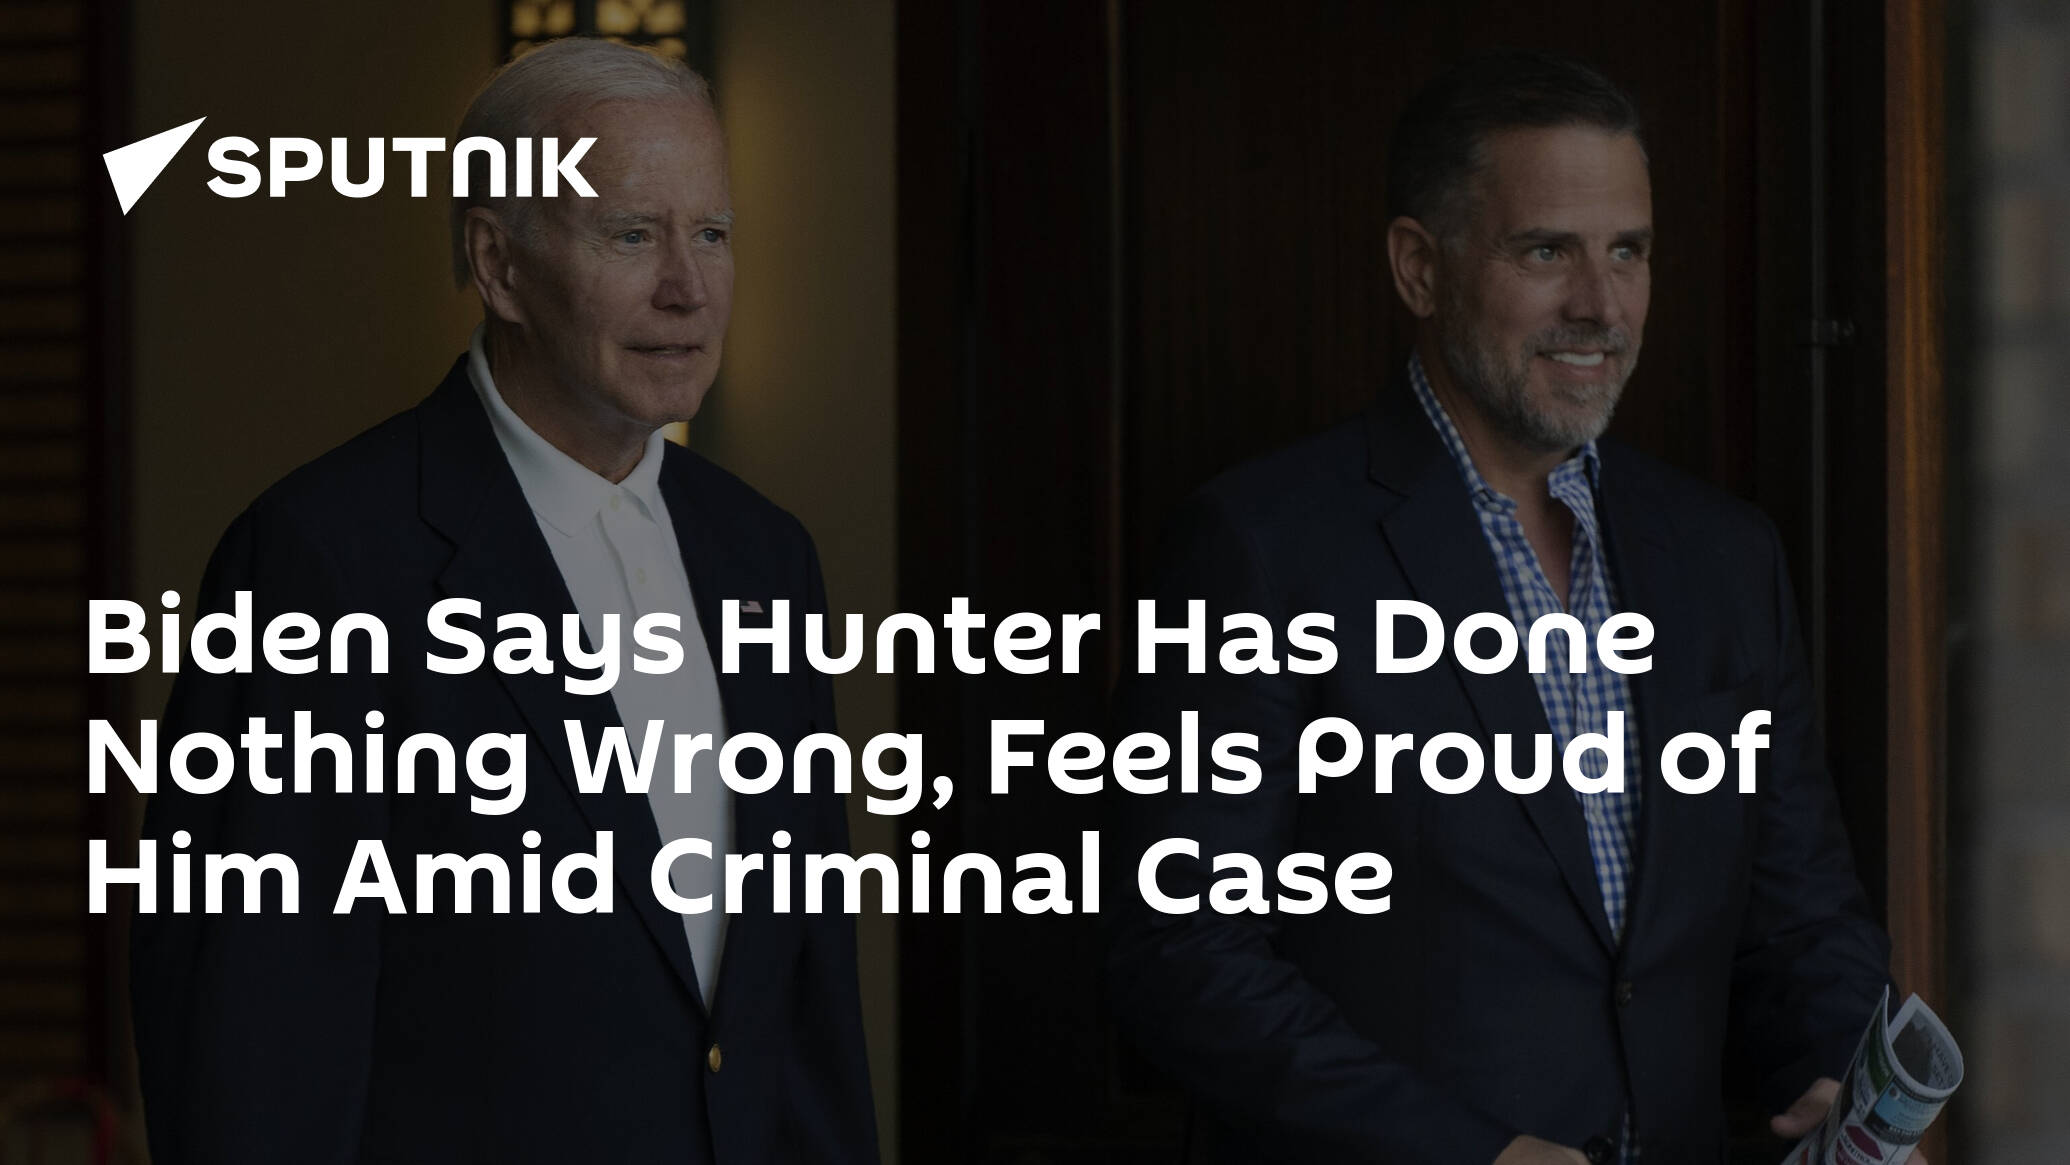 Biden Says Hunter Has Done Nothing Wrong, Feels Proud of Him Amid Criminal Case